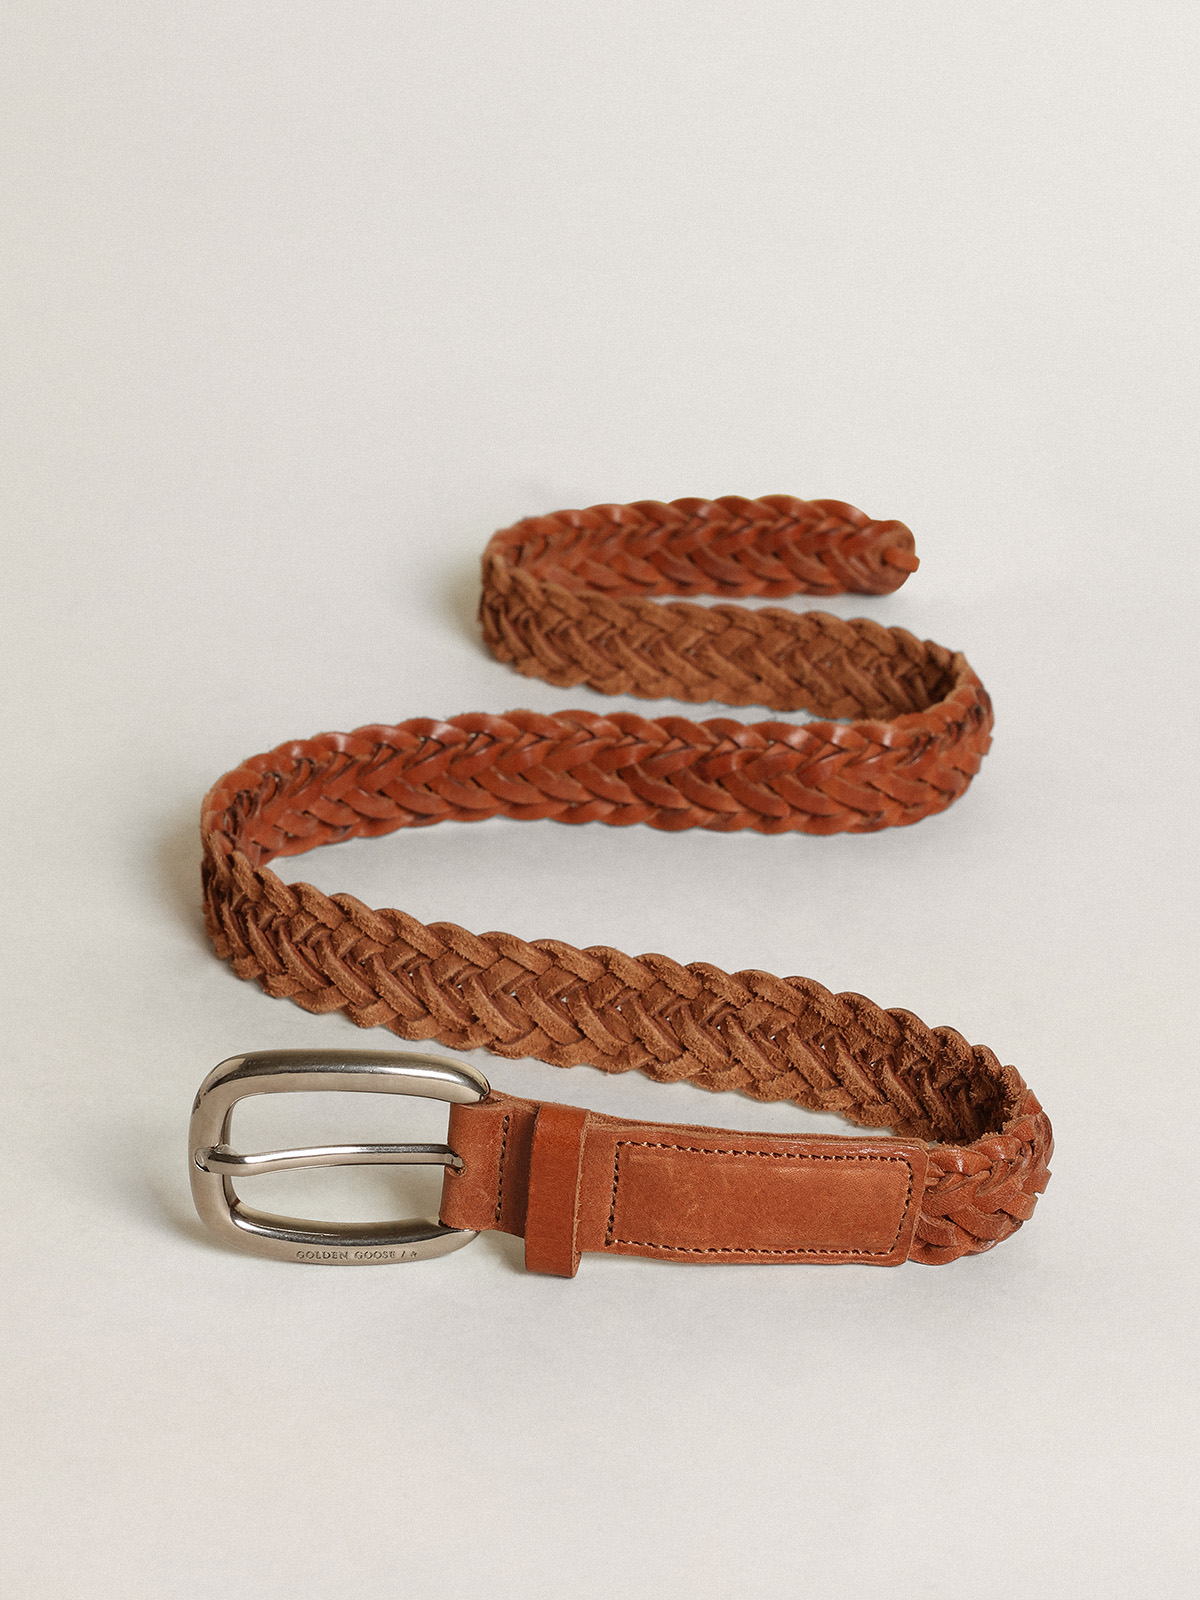 Houston belt in brown braided leather